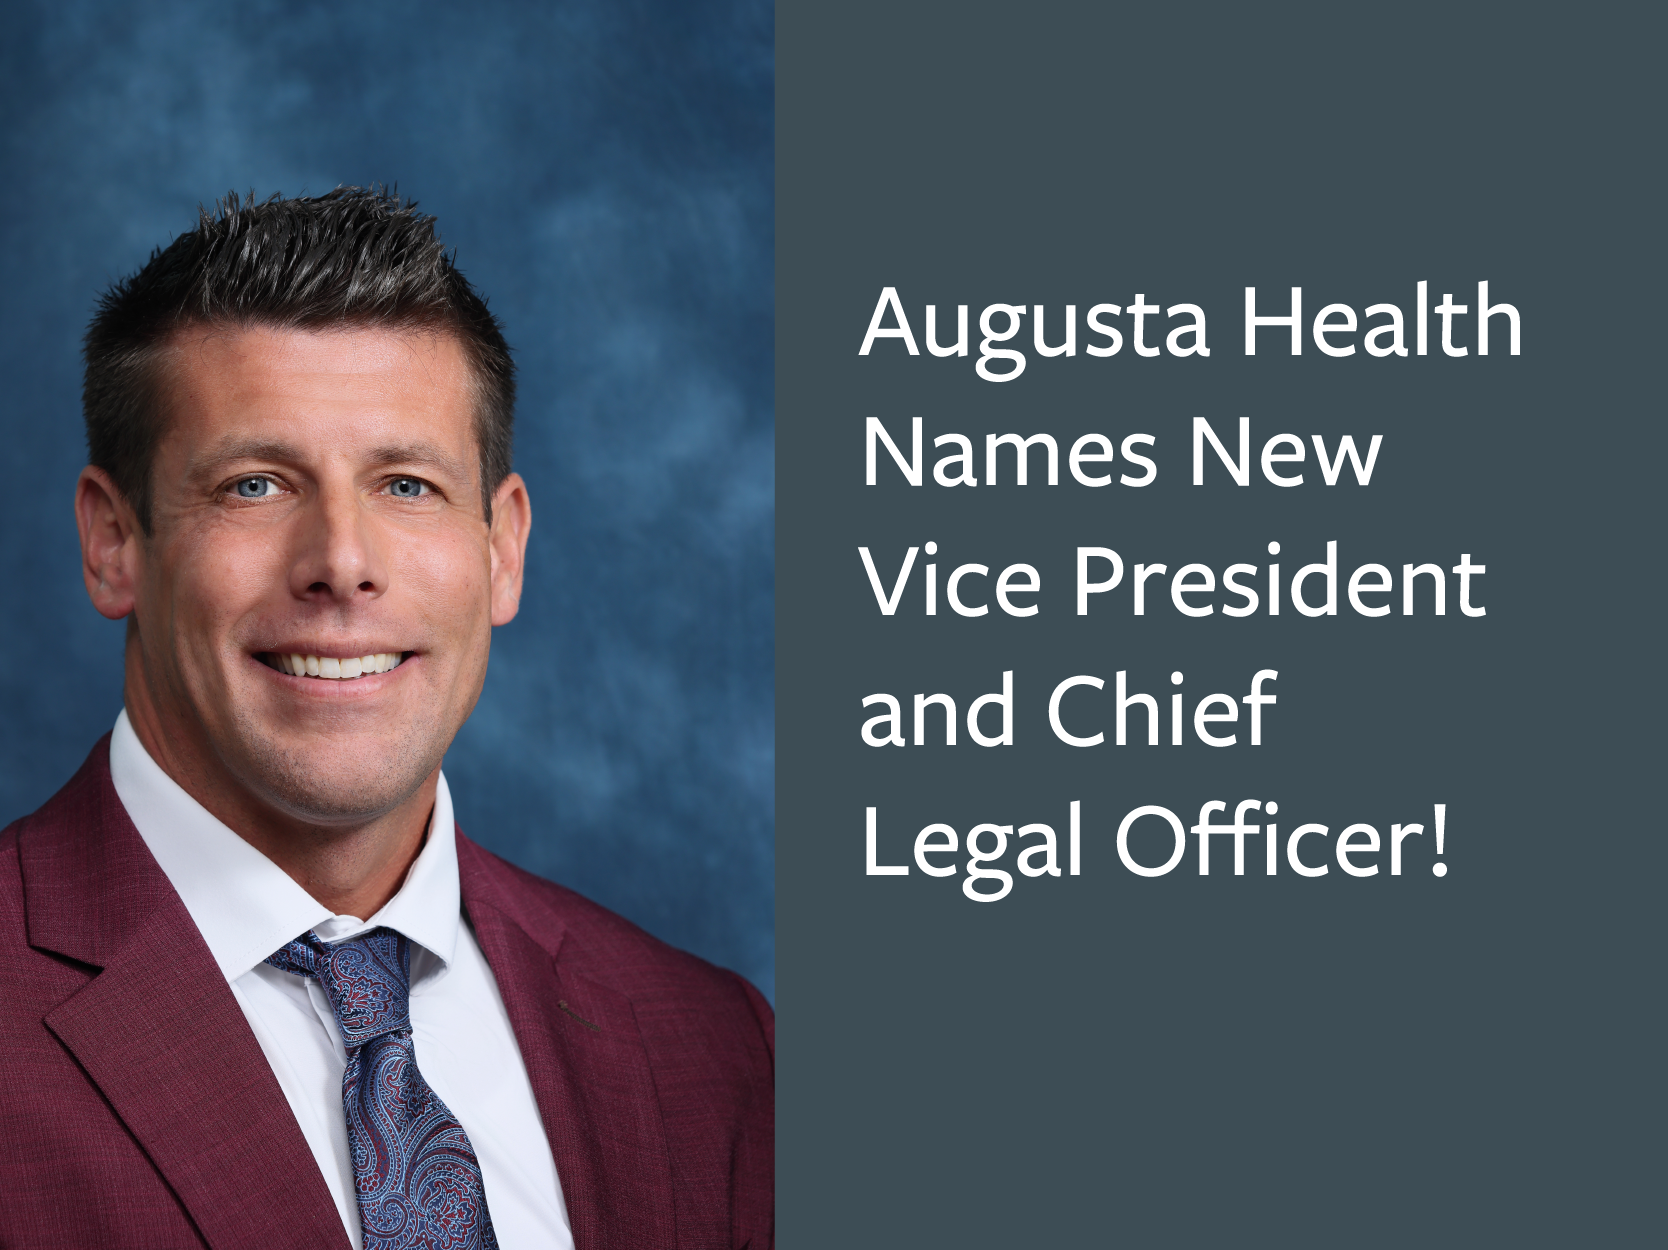 Augusta Health Appoints New Vice President and Chief Legal Officer